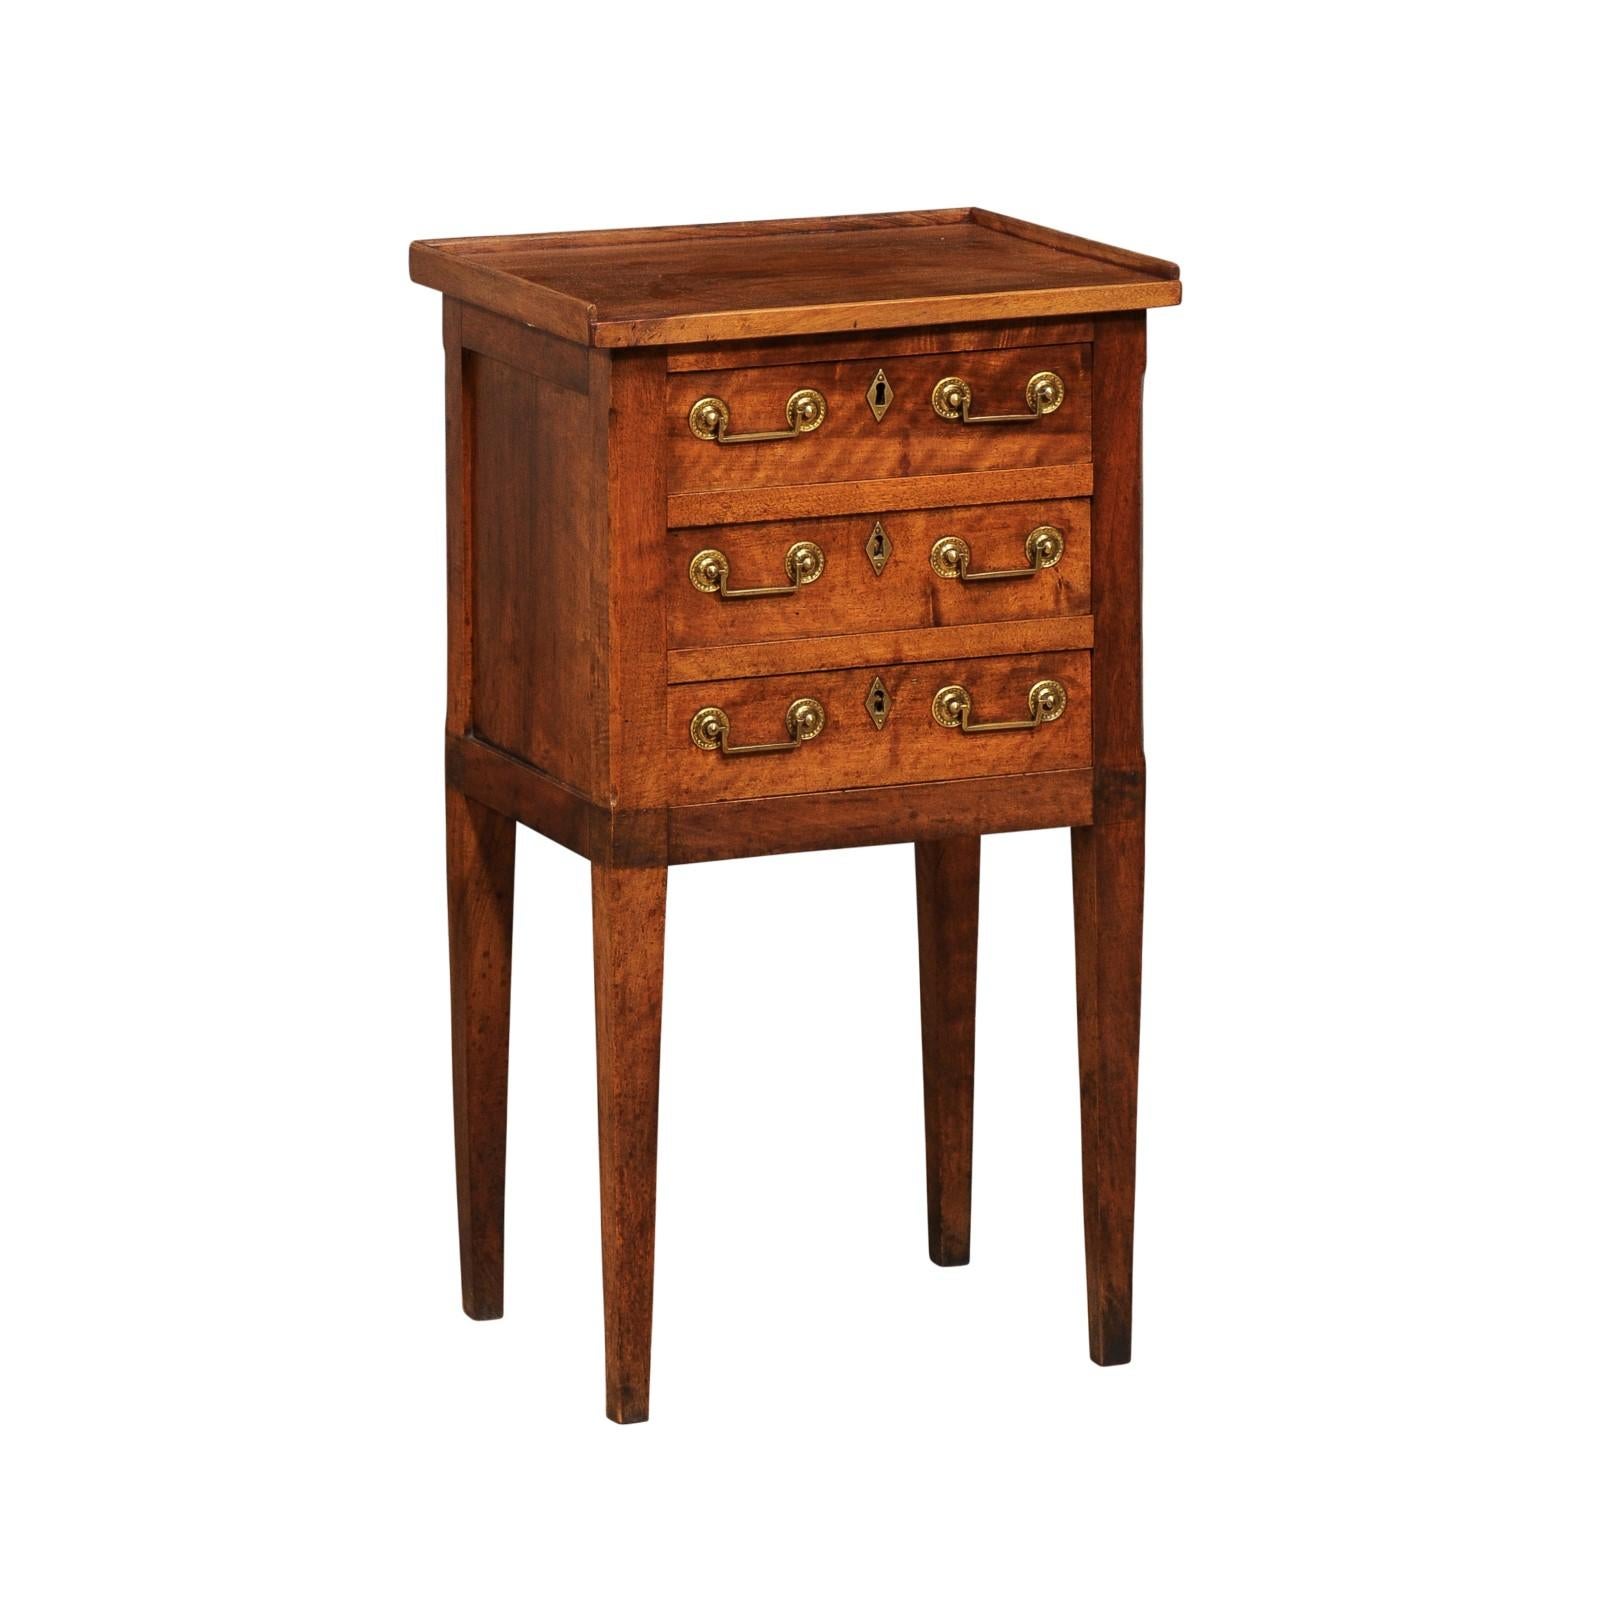 A French Directoire period walnut bedside table from the 18th century with three drawers, tapered legs and brass hardware. Steeped in the elegance of French Directoire design, this 